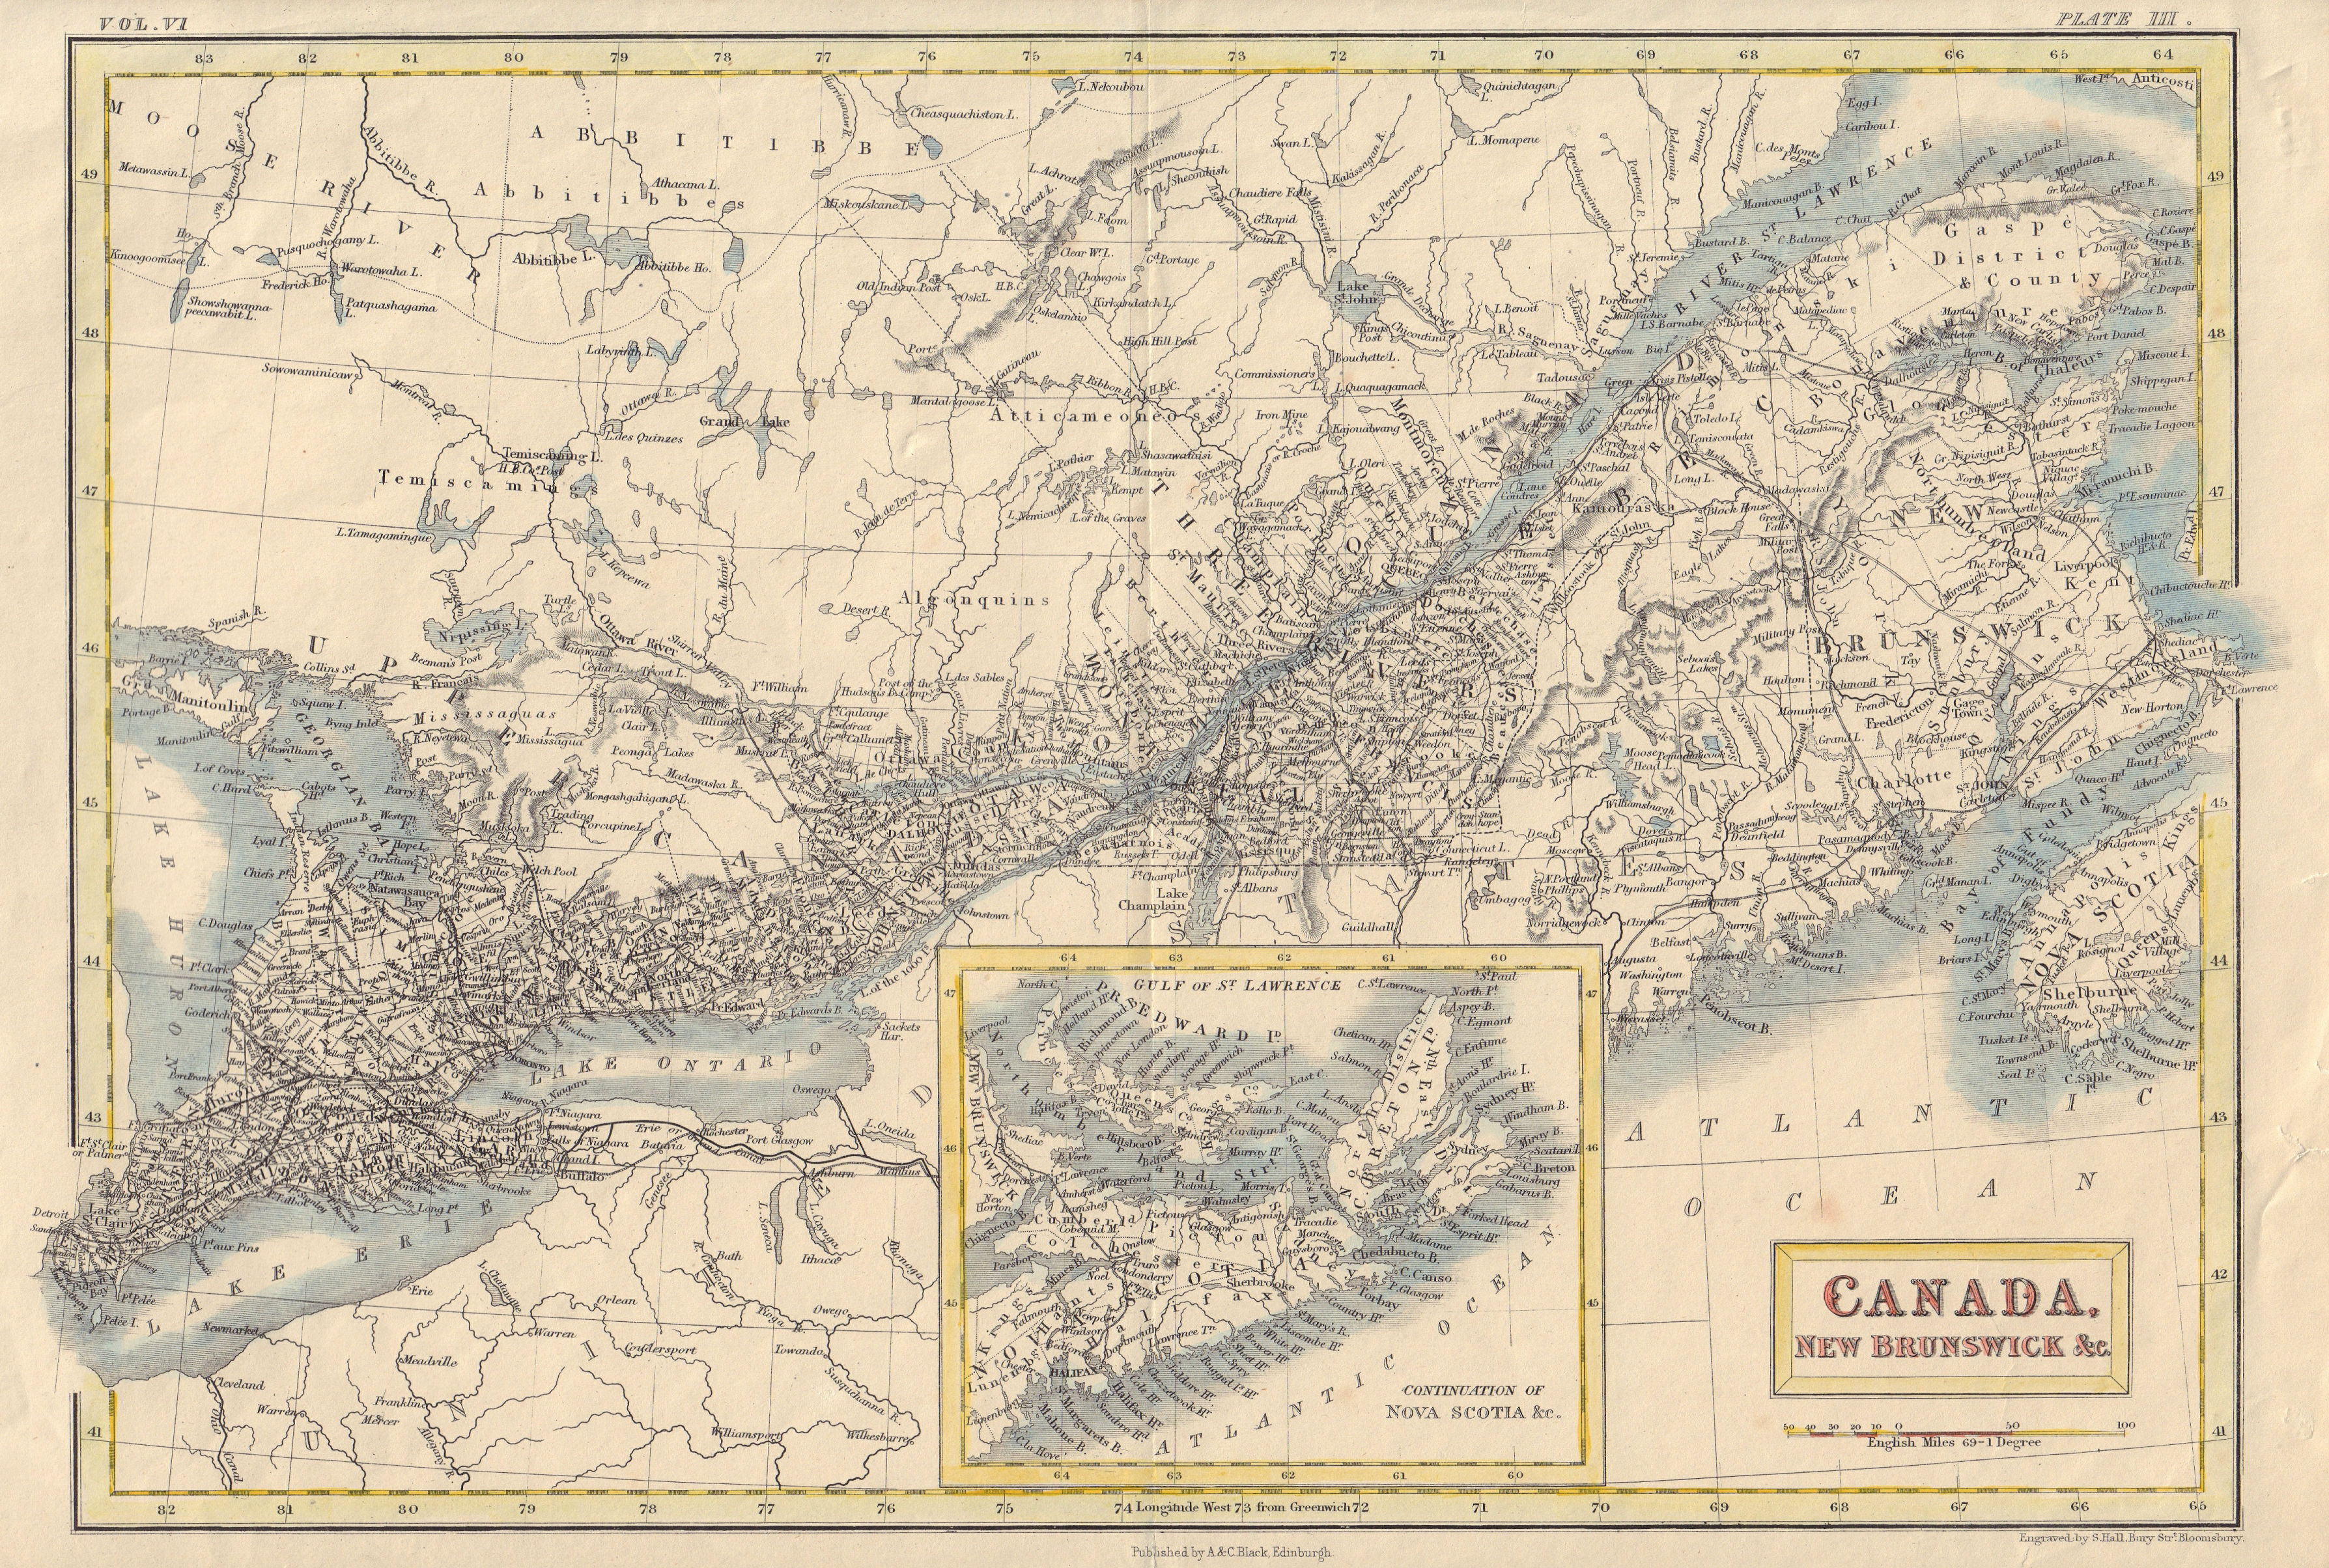 Canada, New Brunswick. St Lawrence Great Lakes Ontario Quebec. BLACK c1840 map